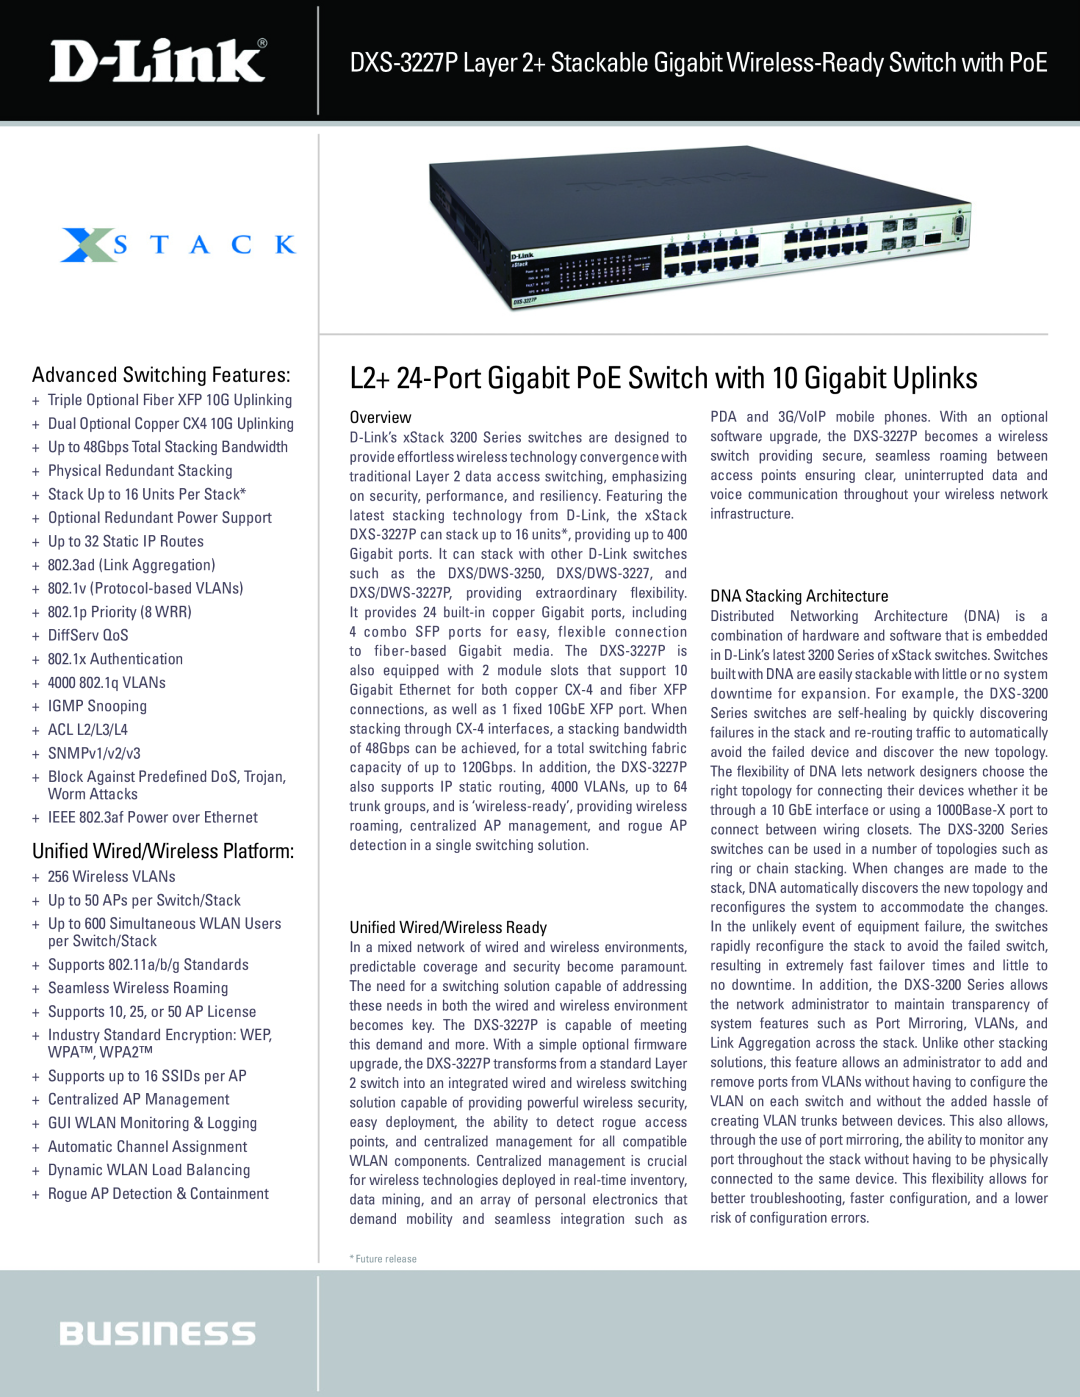 D-Link DXS-3227P manual L2+ 24-Port Gigabit PoE Switch with 10 Gigabit Uplinks, Advanced Switching Features 